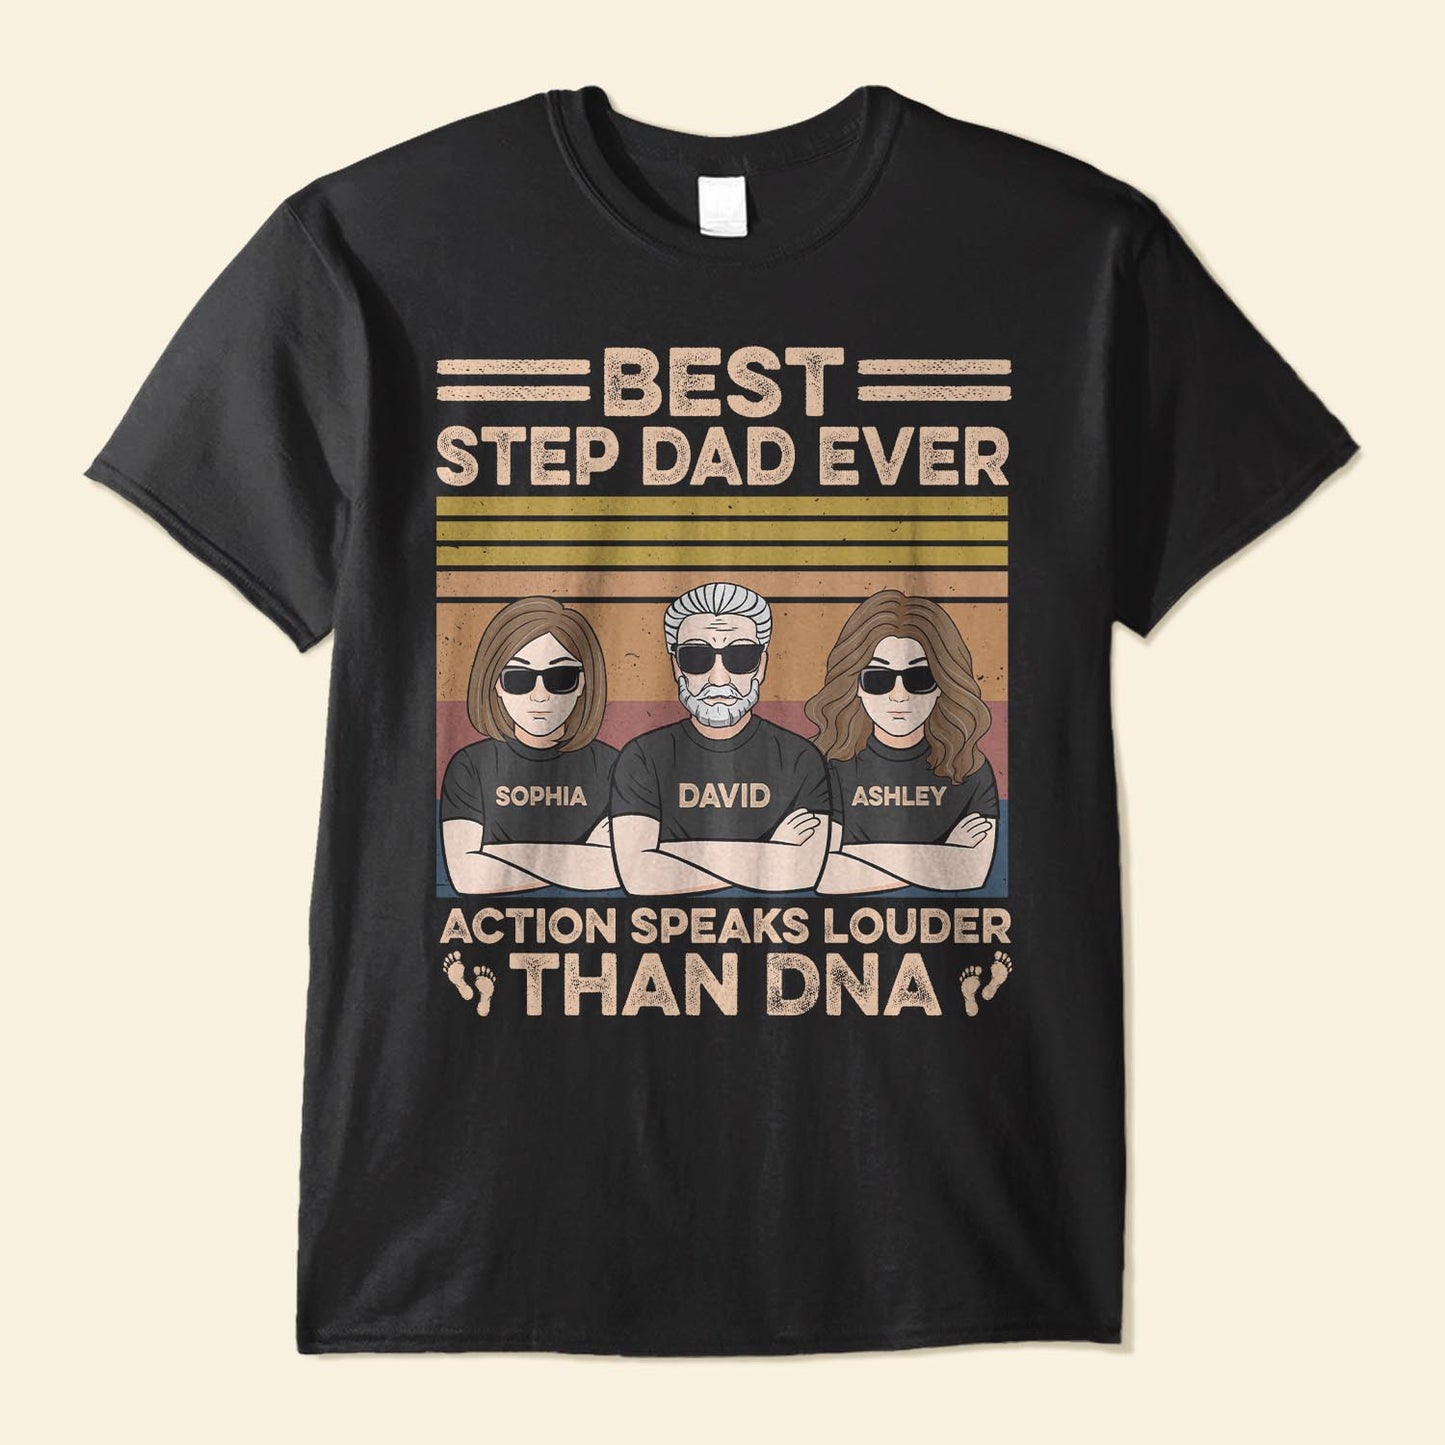 Action Speaks Louder Than Dna - Personalized Shirt - Birthday, Father's Day Gift For Step Dad, Bonus Dad, Dad, Father